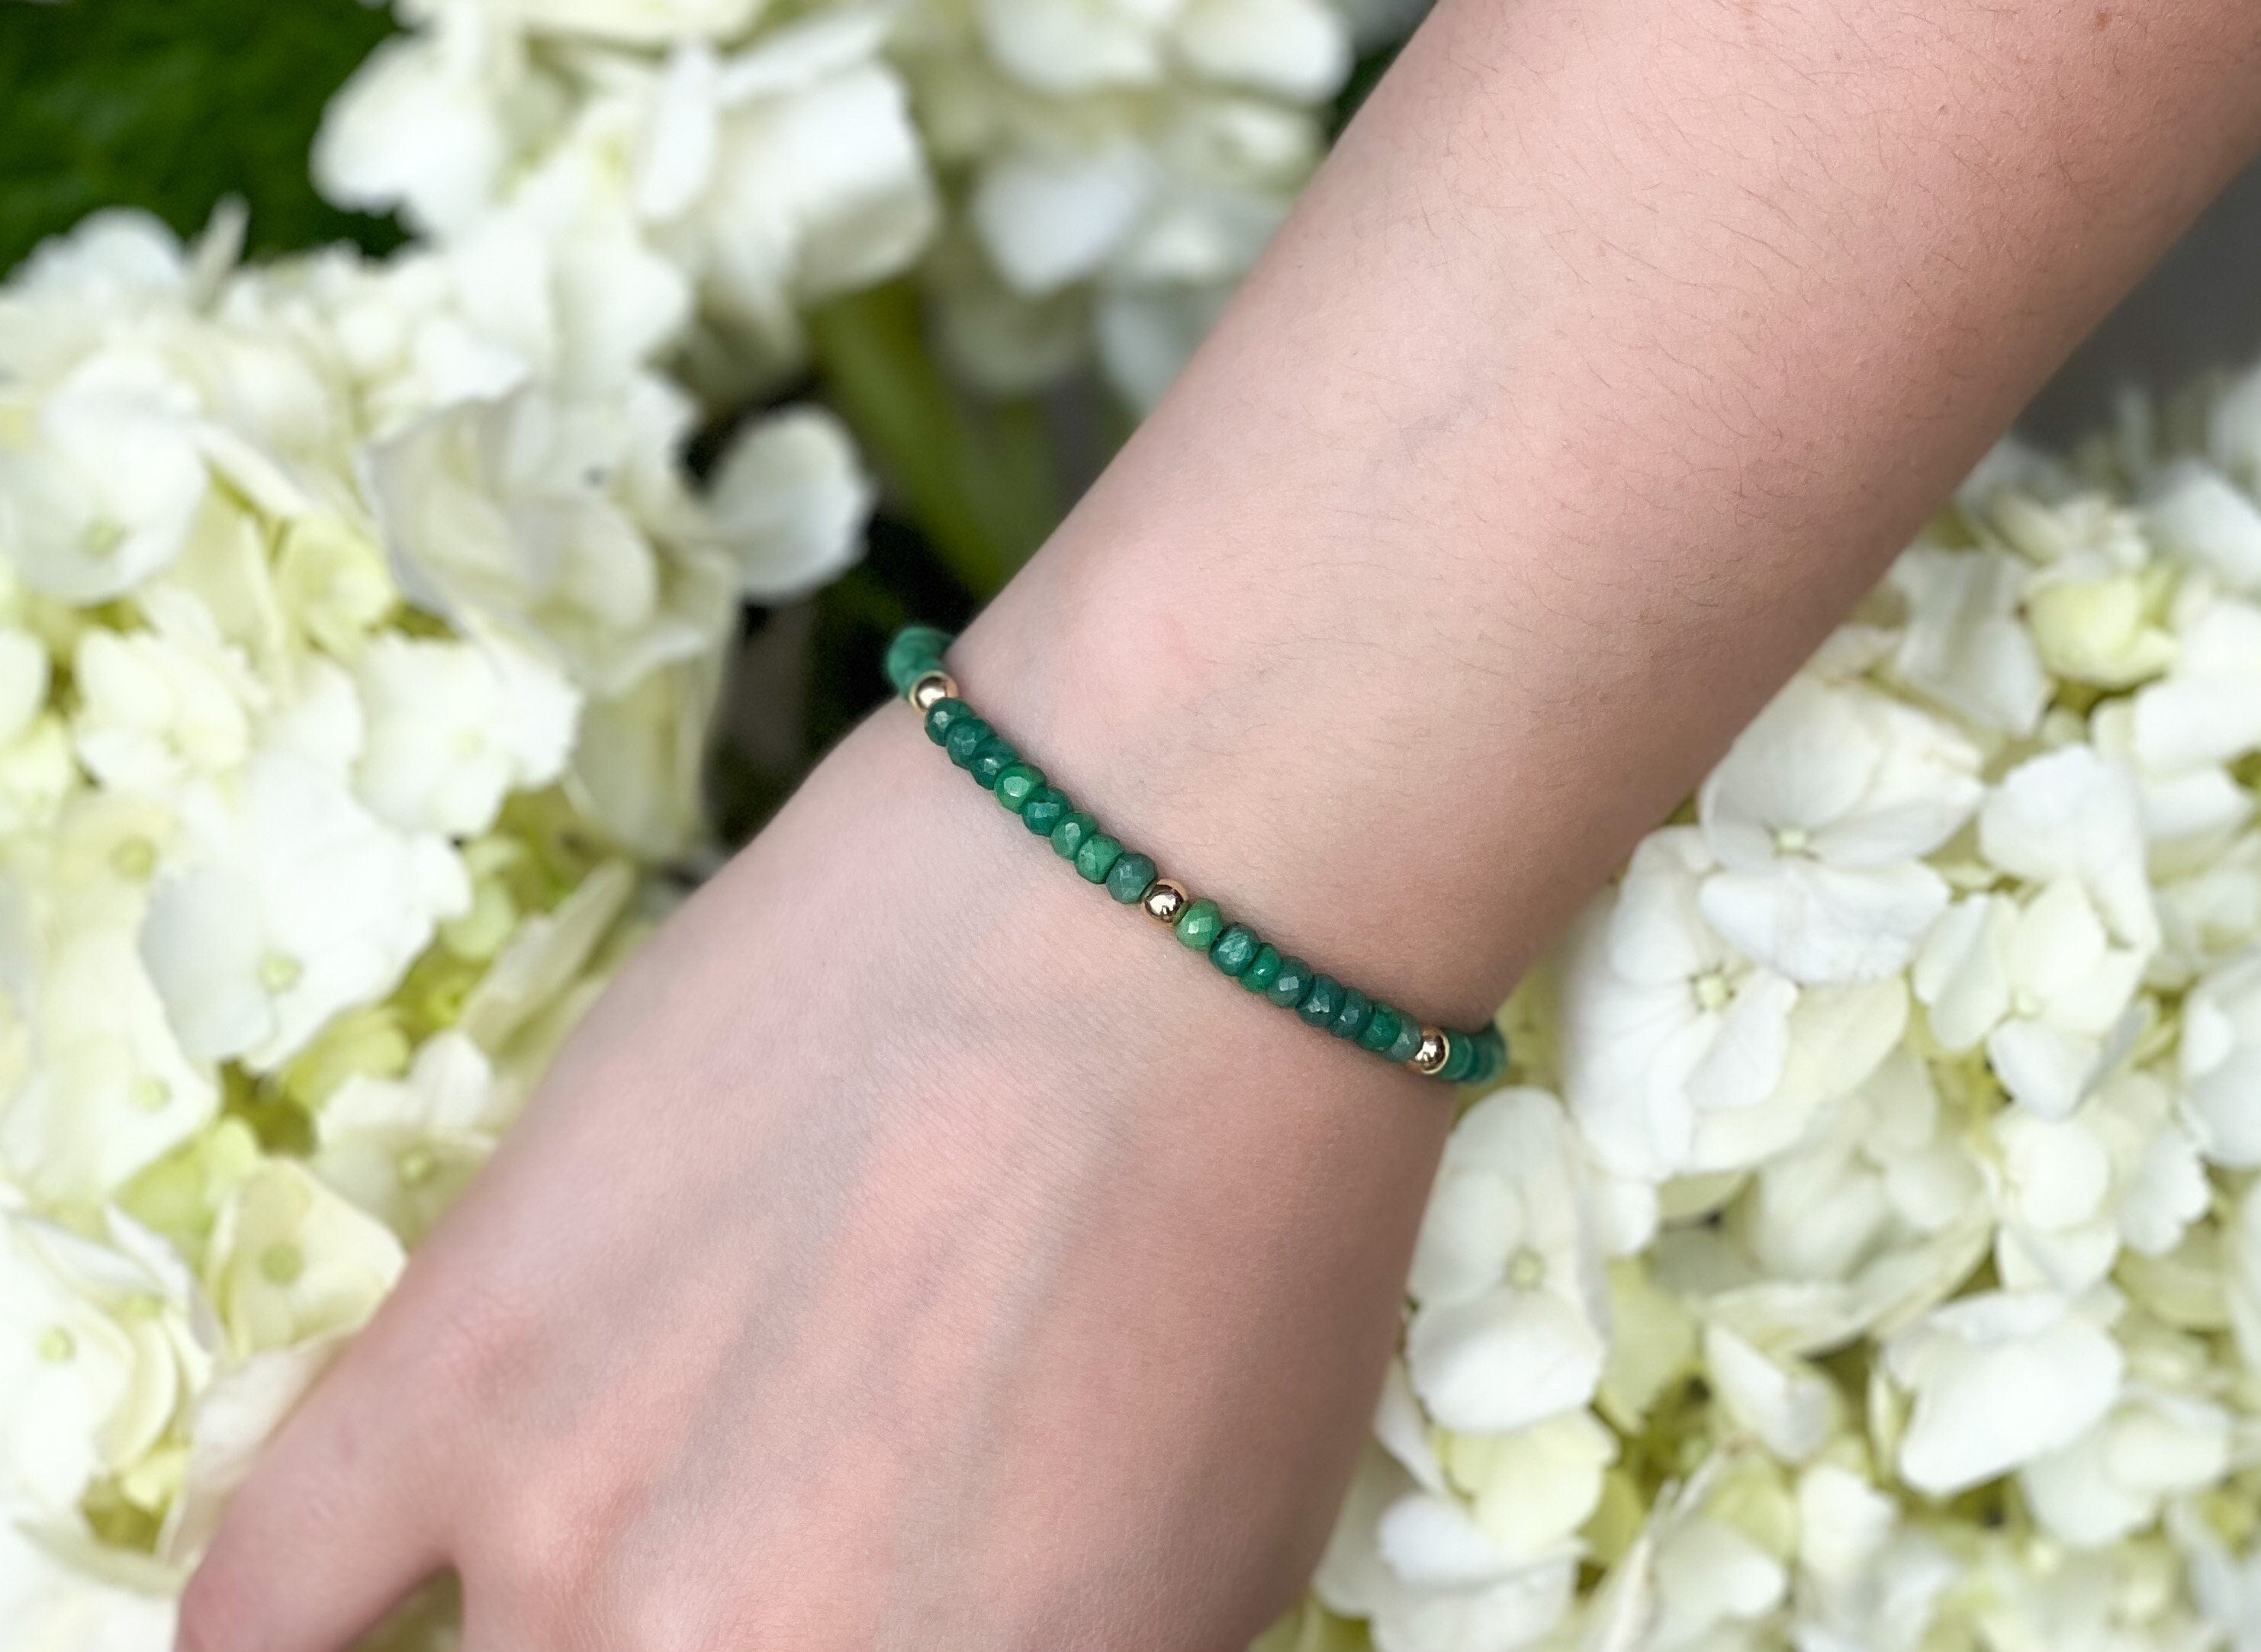 Emeralds,emerald_bracelet,Natural_Emeralds,Gemstone_bracelet,Emeralds_with_gold,Gold_filled_accents,handmade_jewelry,May_Birthstone,gifts_for_Her,Mother's_Day_Gifts,Classic_jewelry,layering_bracelets,Birthstone_bracelets